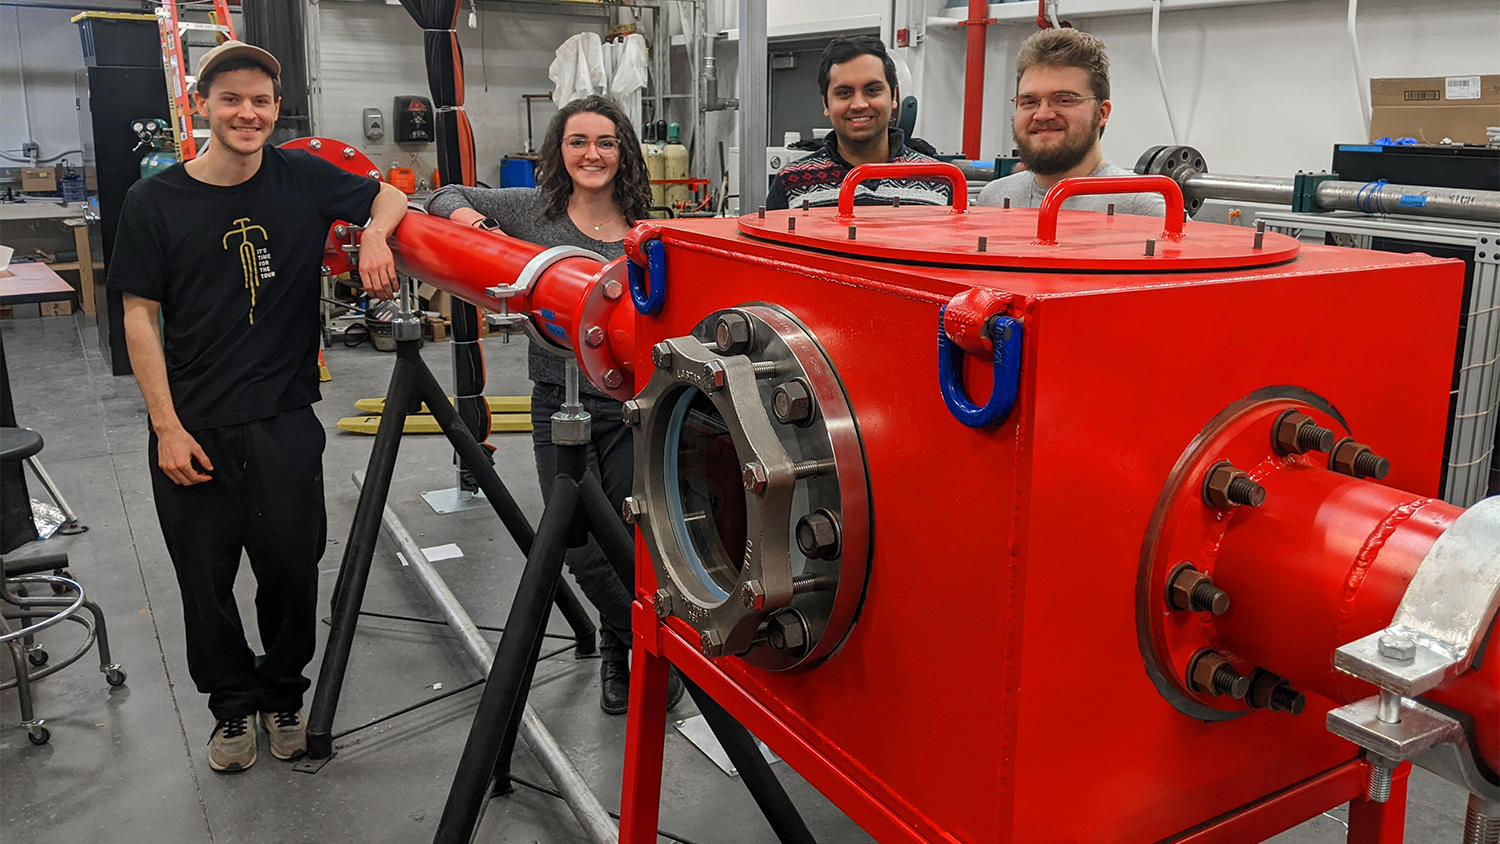 Engineering students stand around the new hypersonic tunnel. The tunnel test box and piping are painted in NC State red and is located in an industrial setting.